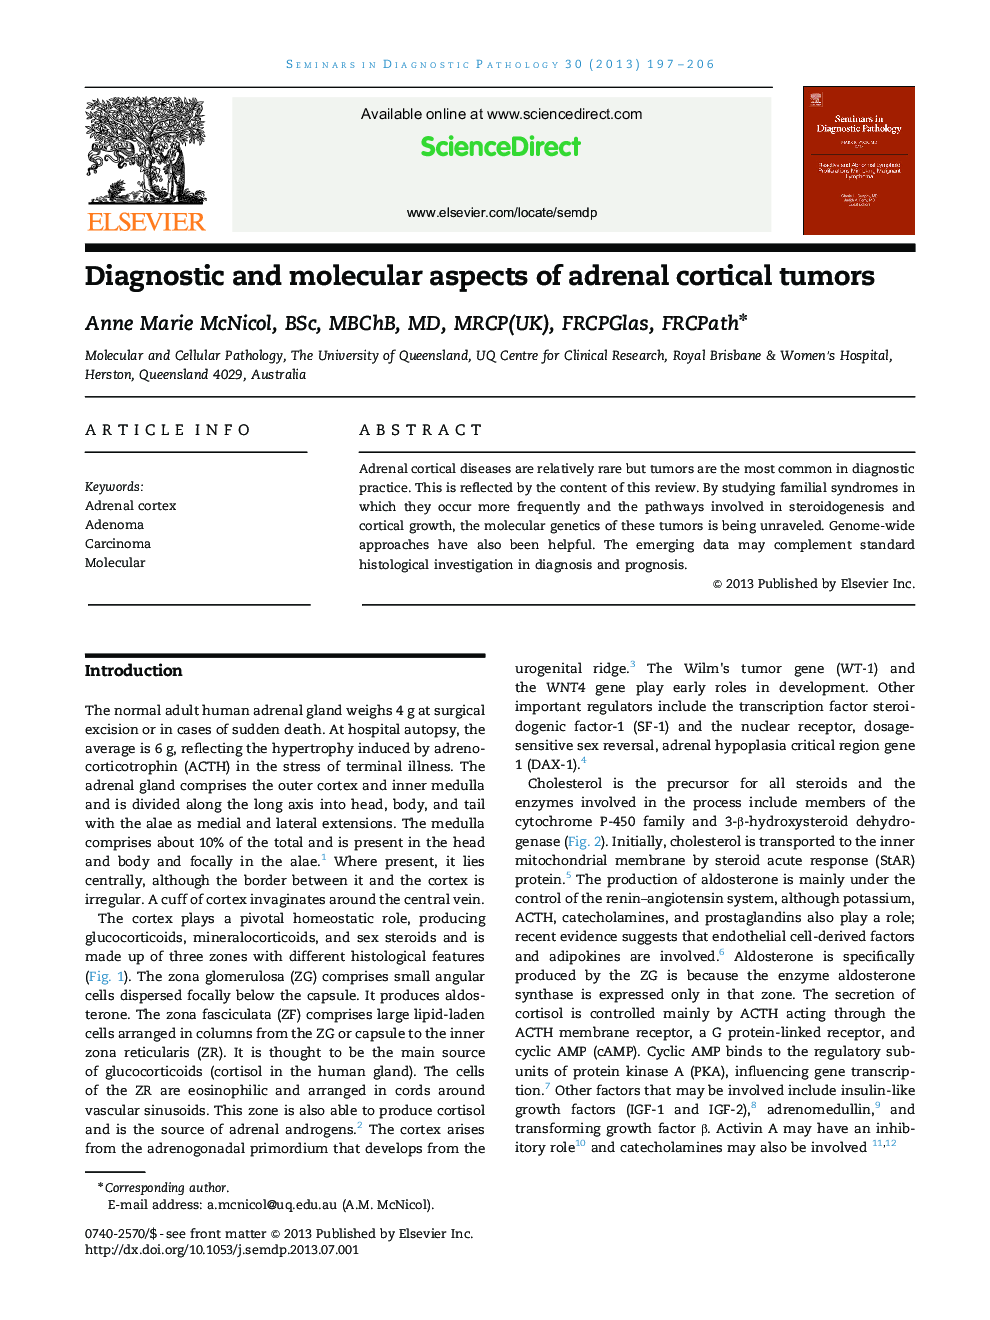 Diagnostic and molecular aspects of adrenal cortical tumors